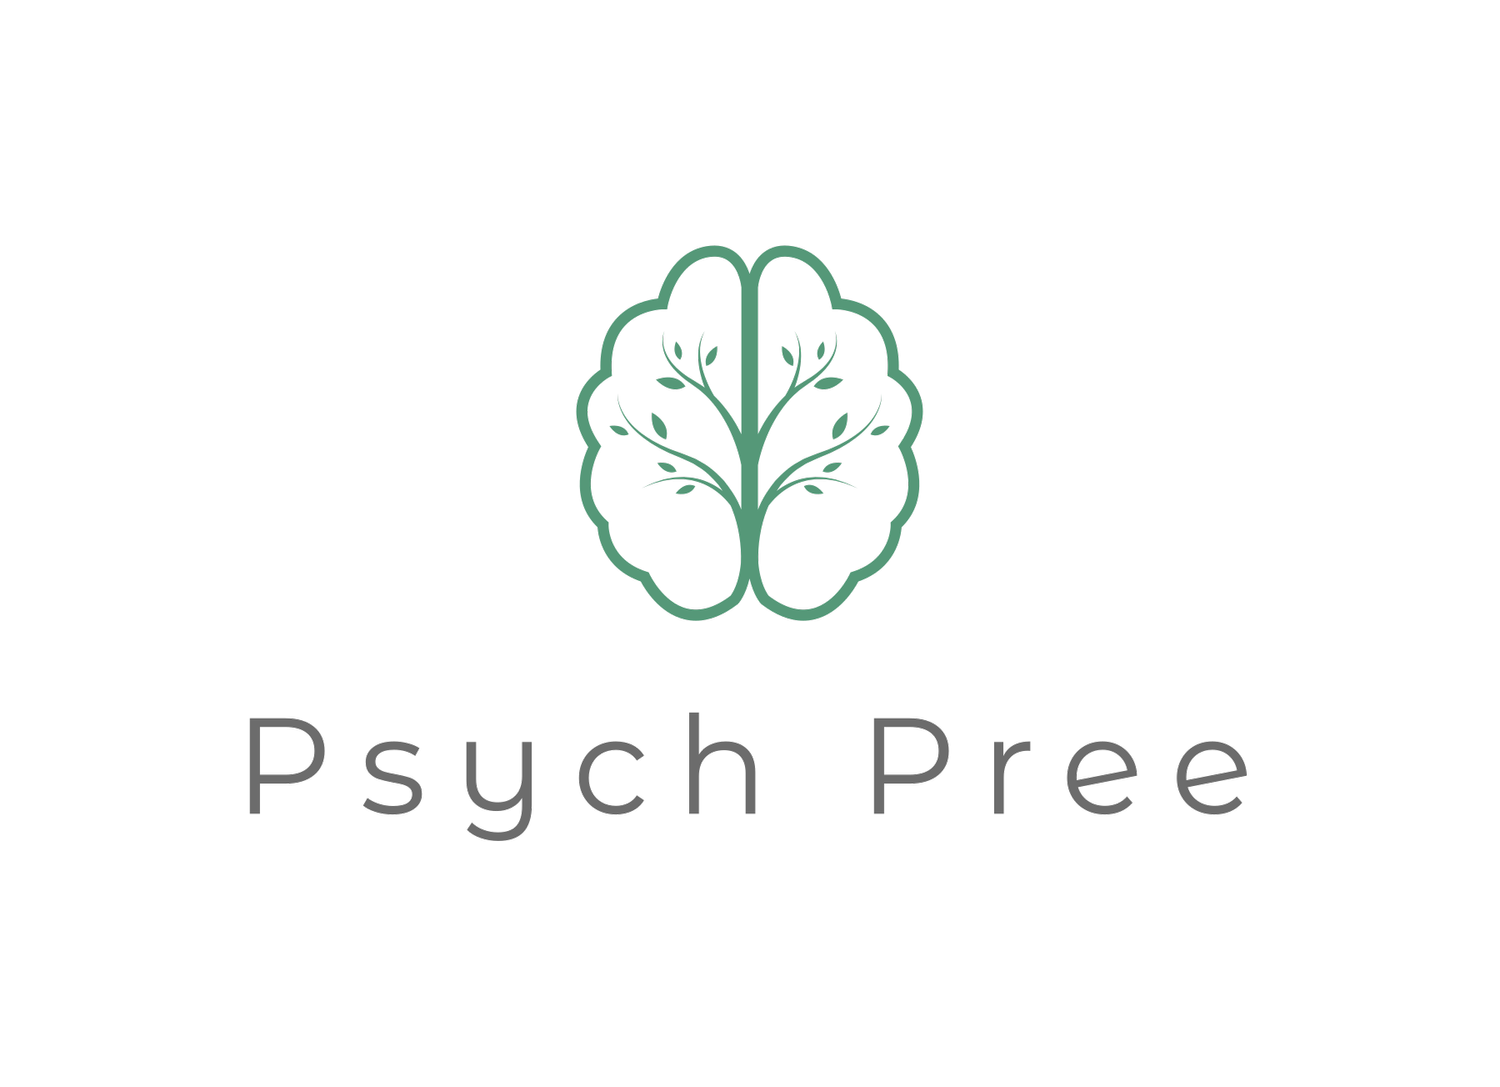 Psych Pree Psychological Services